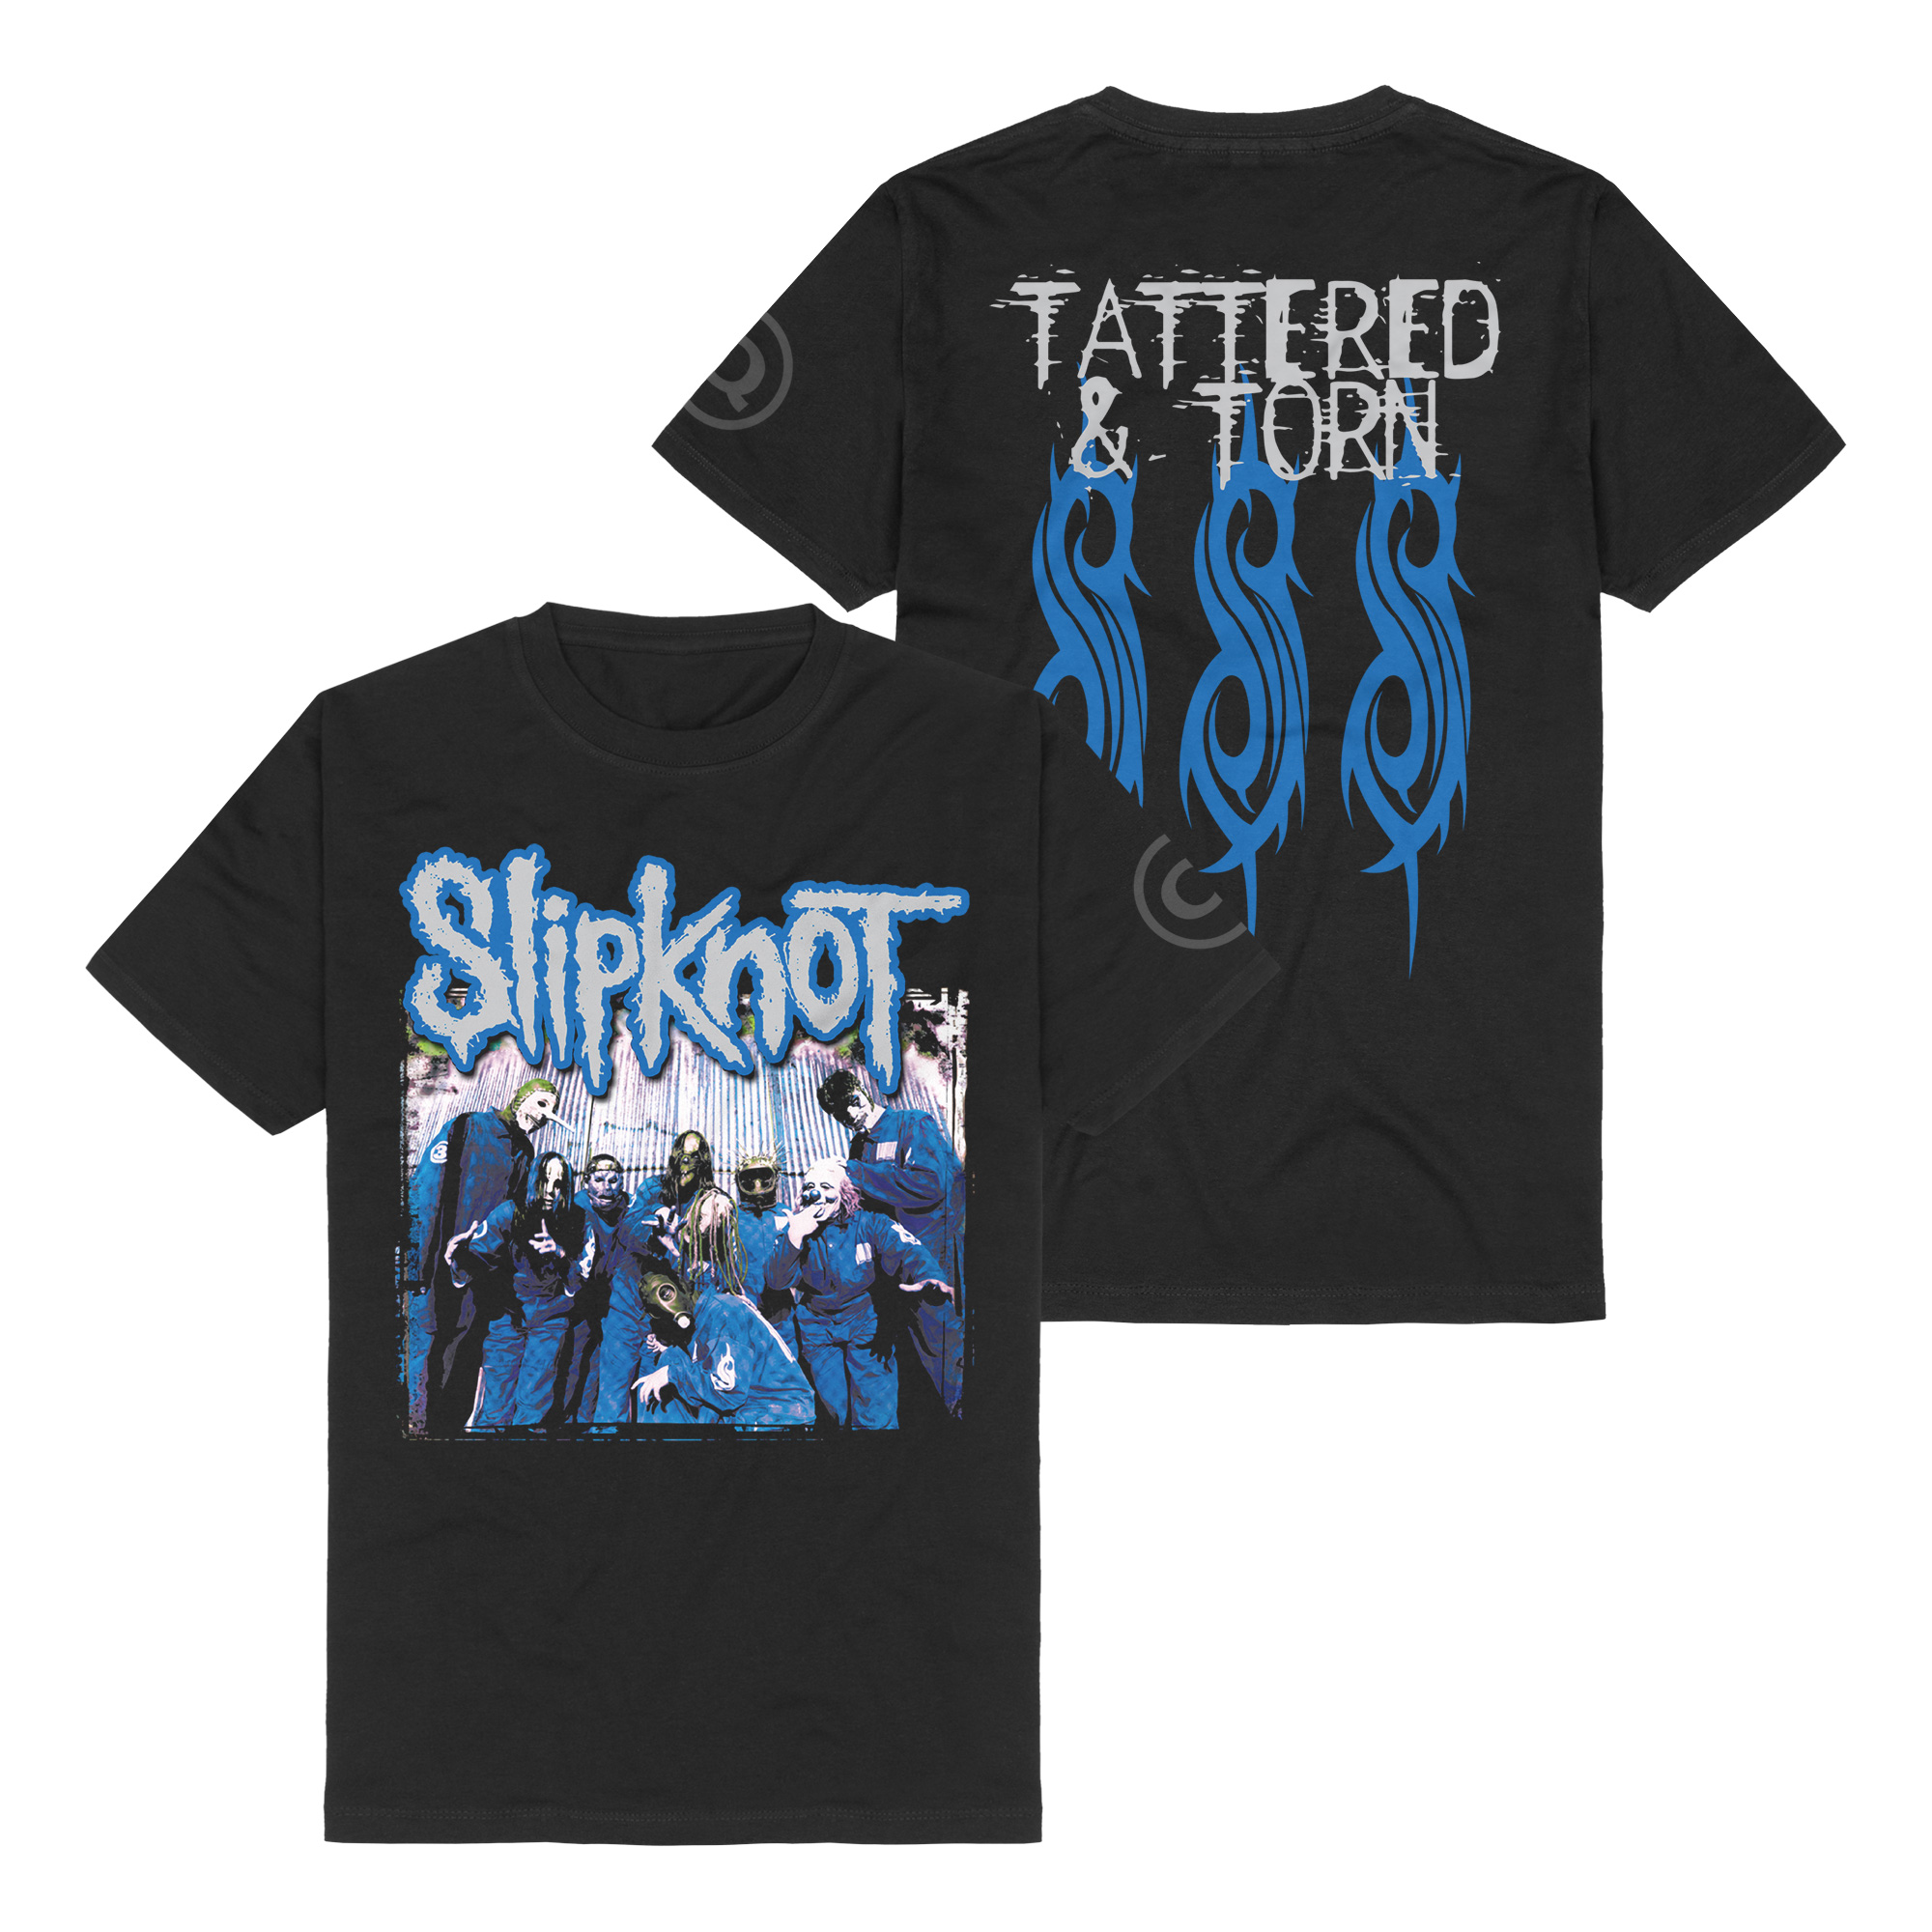 Slipknot - Tattered And Torn 20th Anniversary